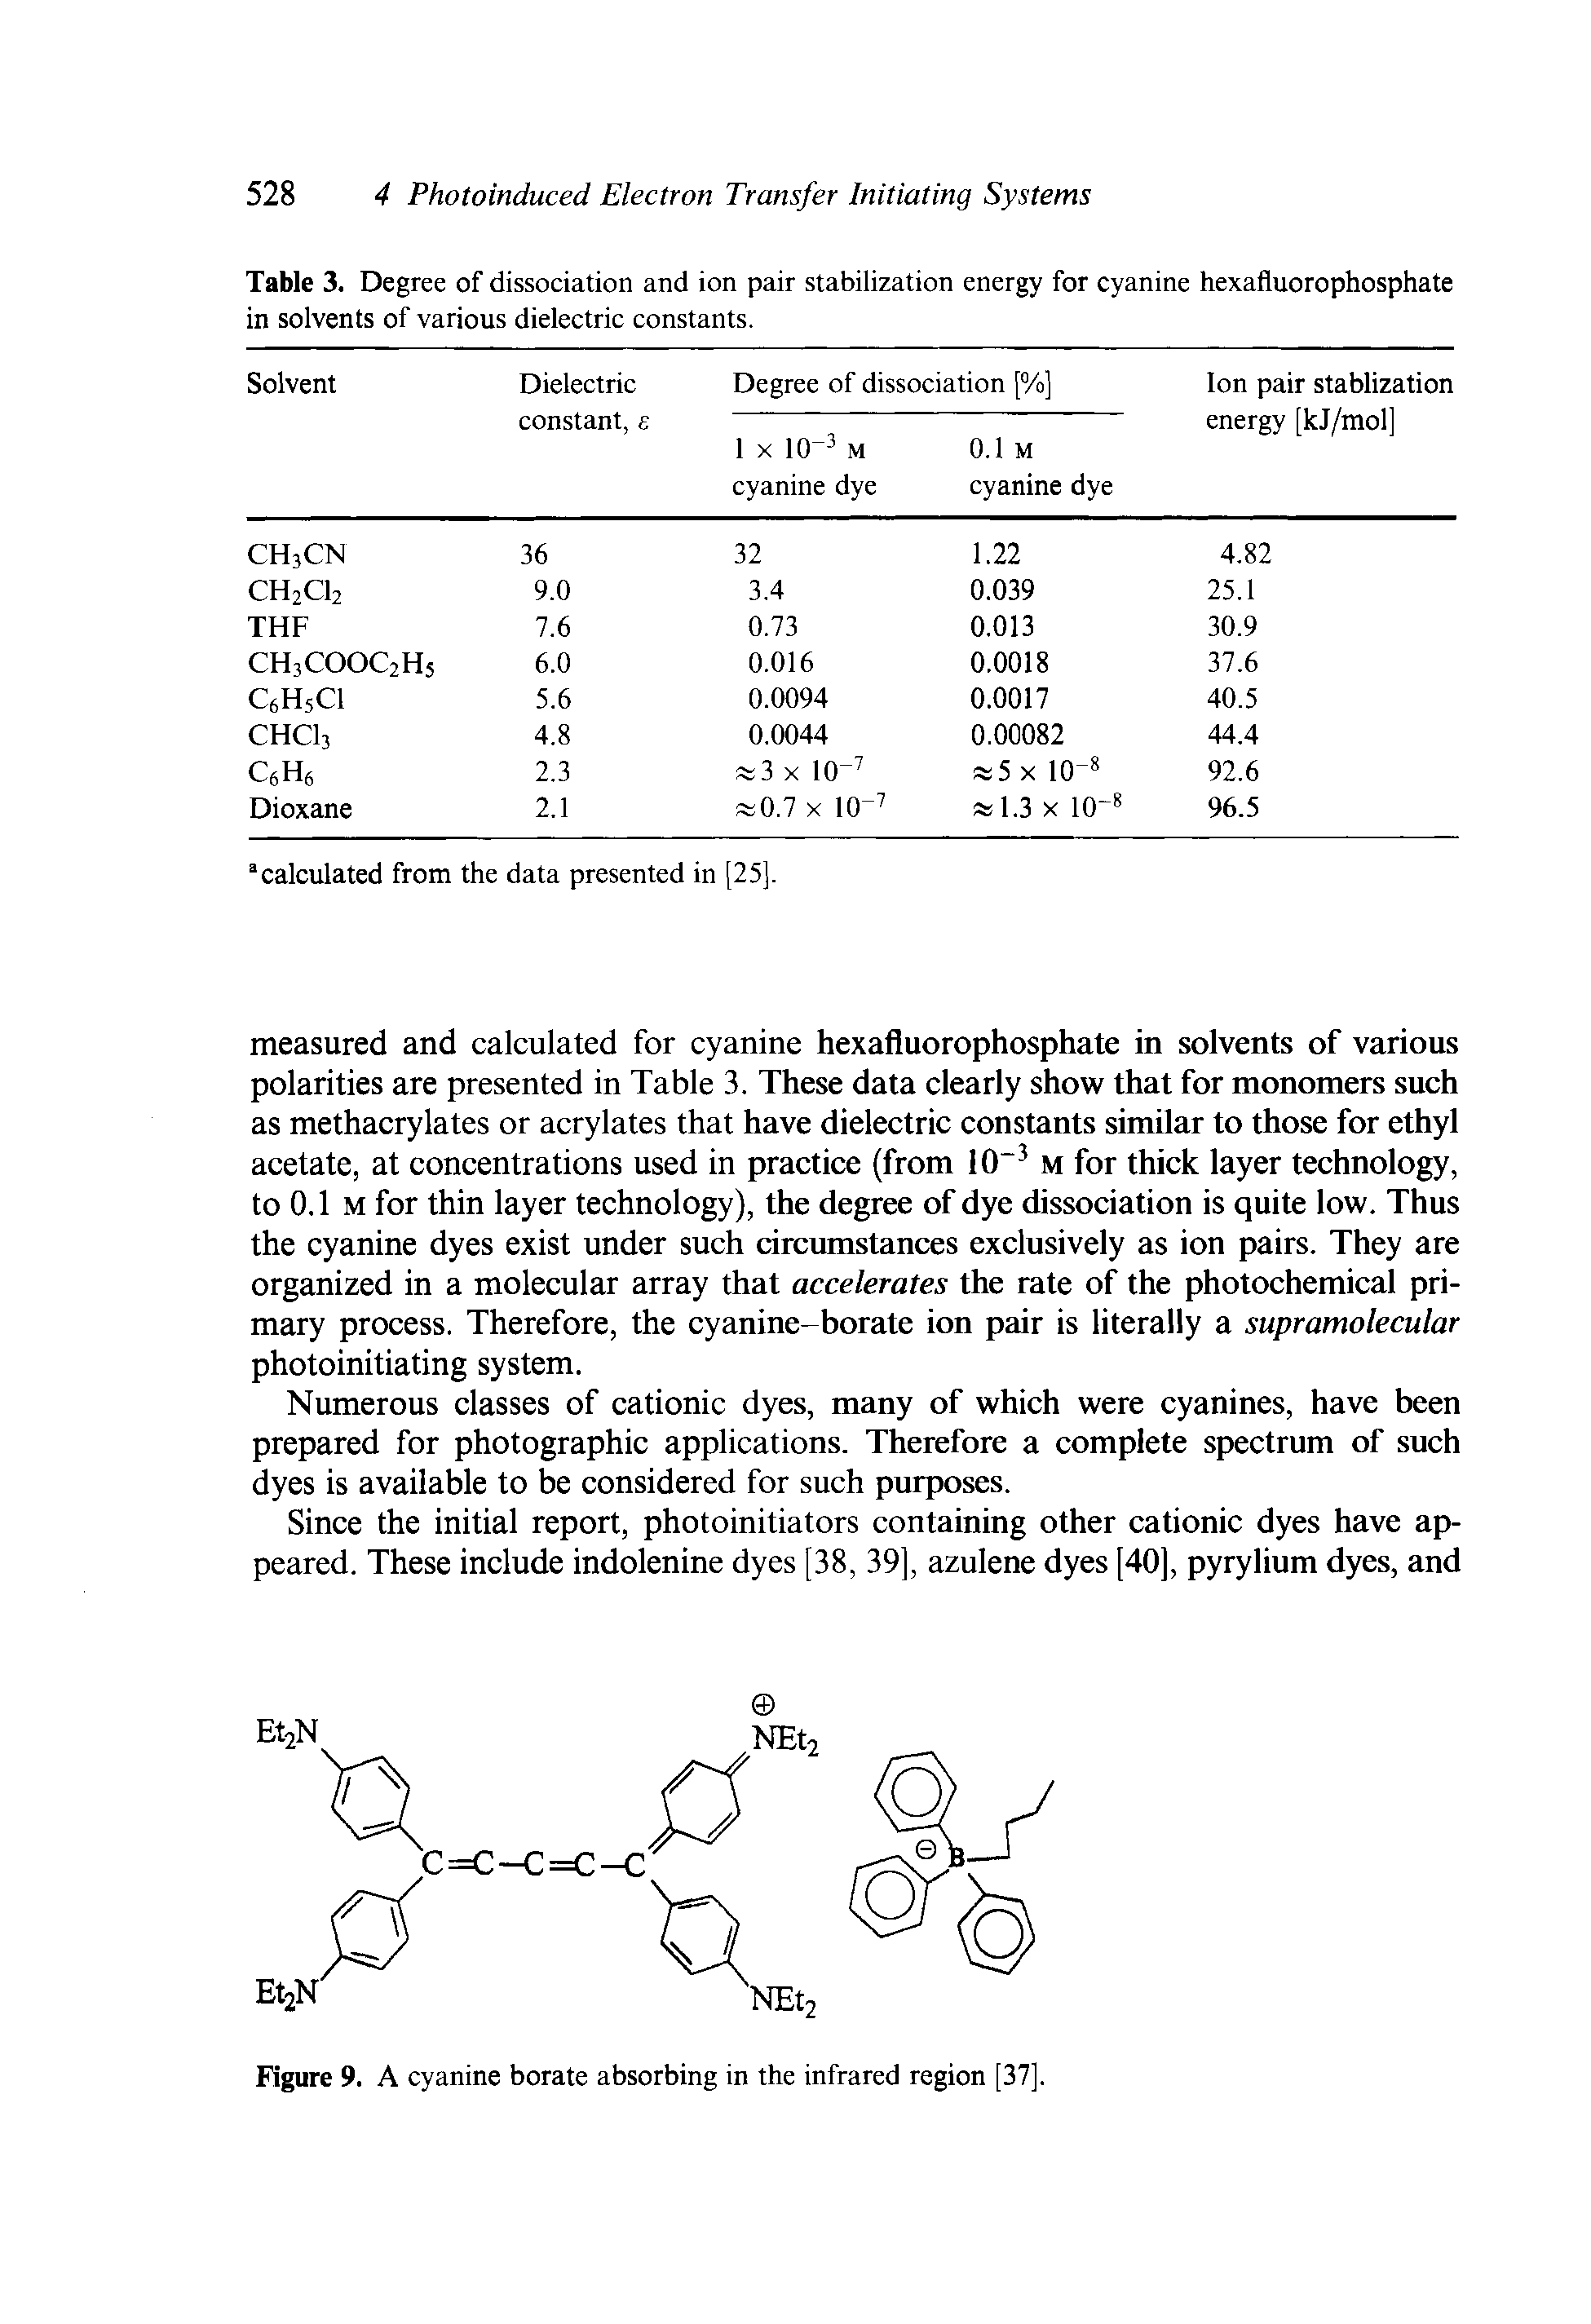 Table 3. Degree of dissociation and ion pair stabilization energy for cyanine hexafluorophosphate in solvents of various dielectric constants.